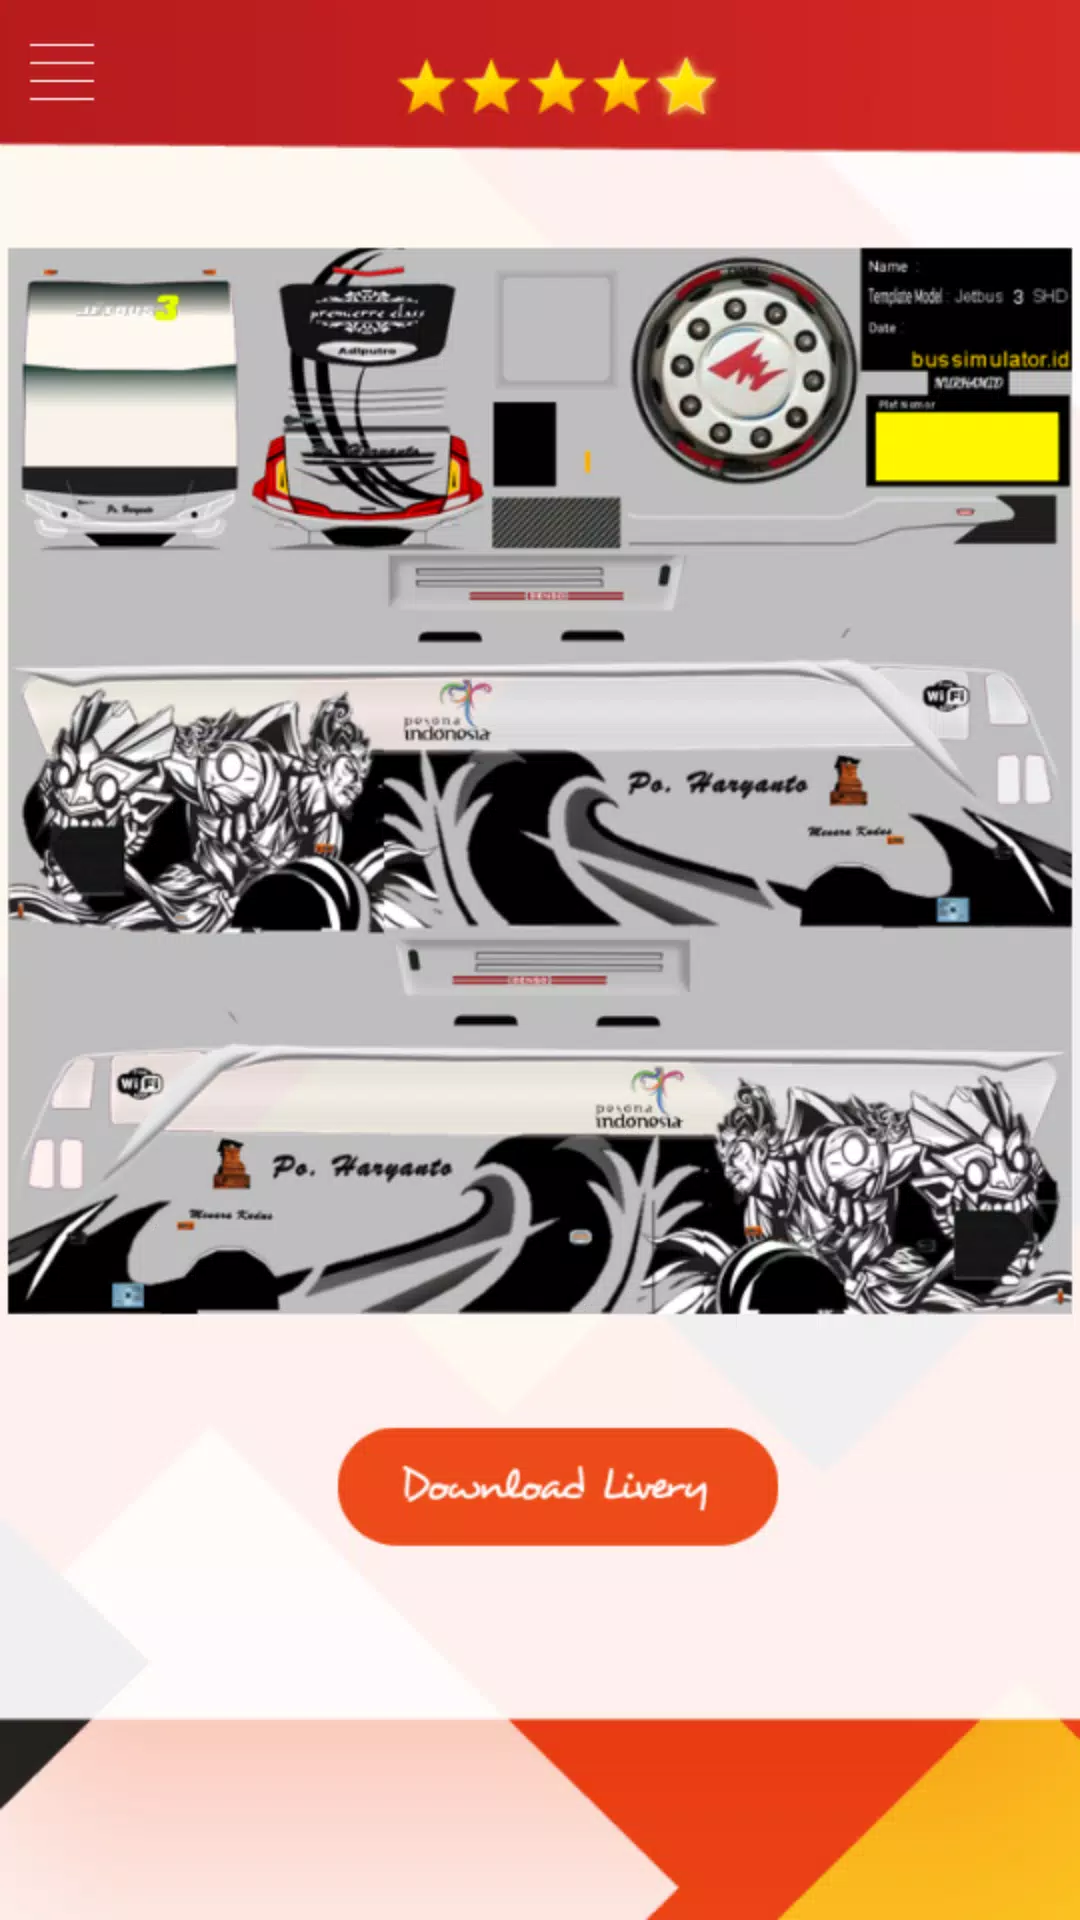 Detail Template Livery For Jetbus Shd Nomer 23